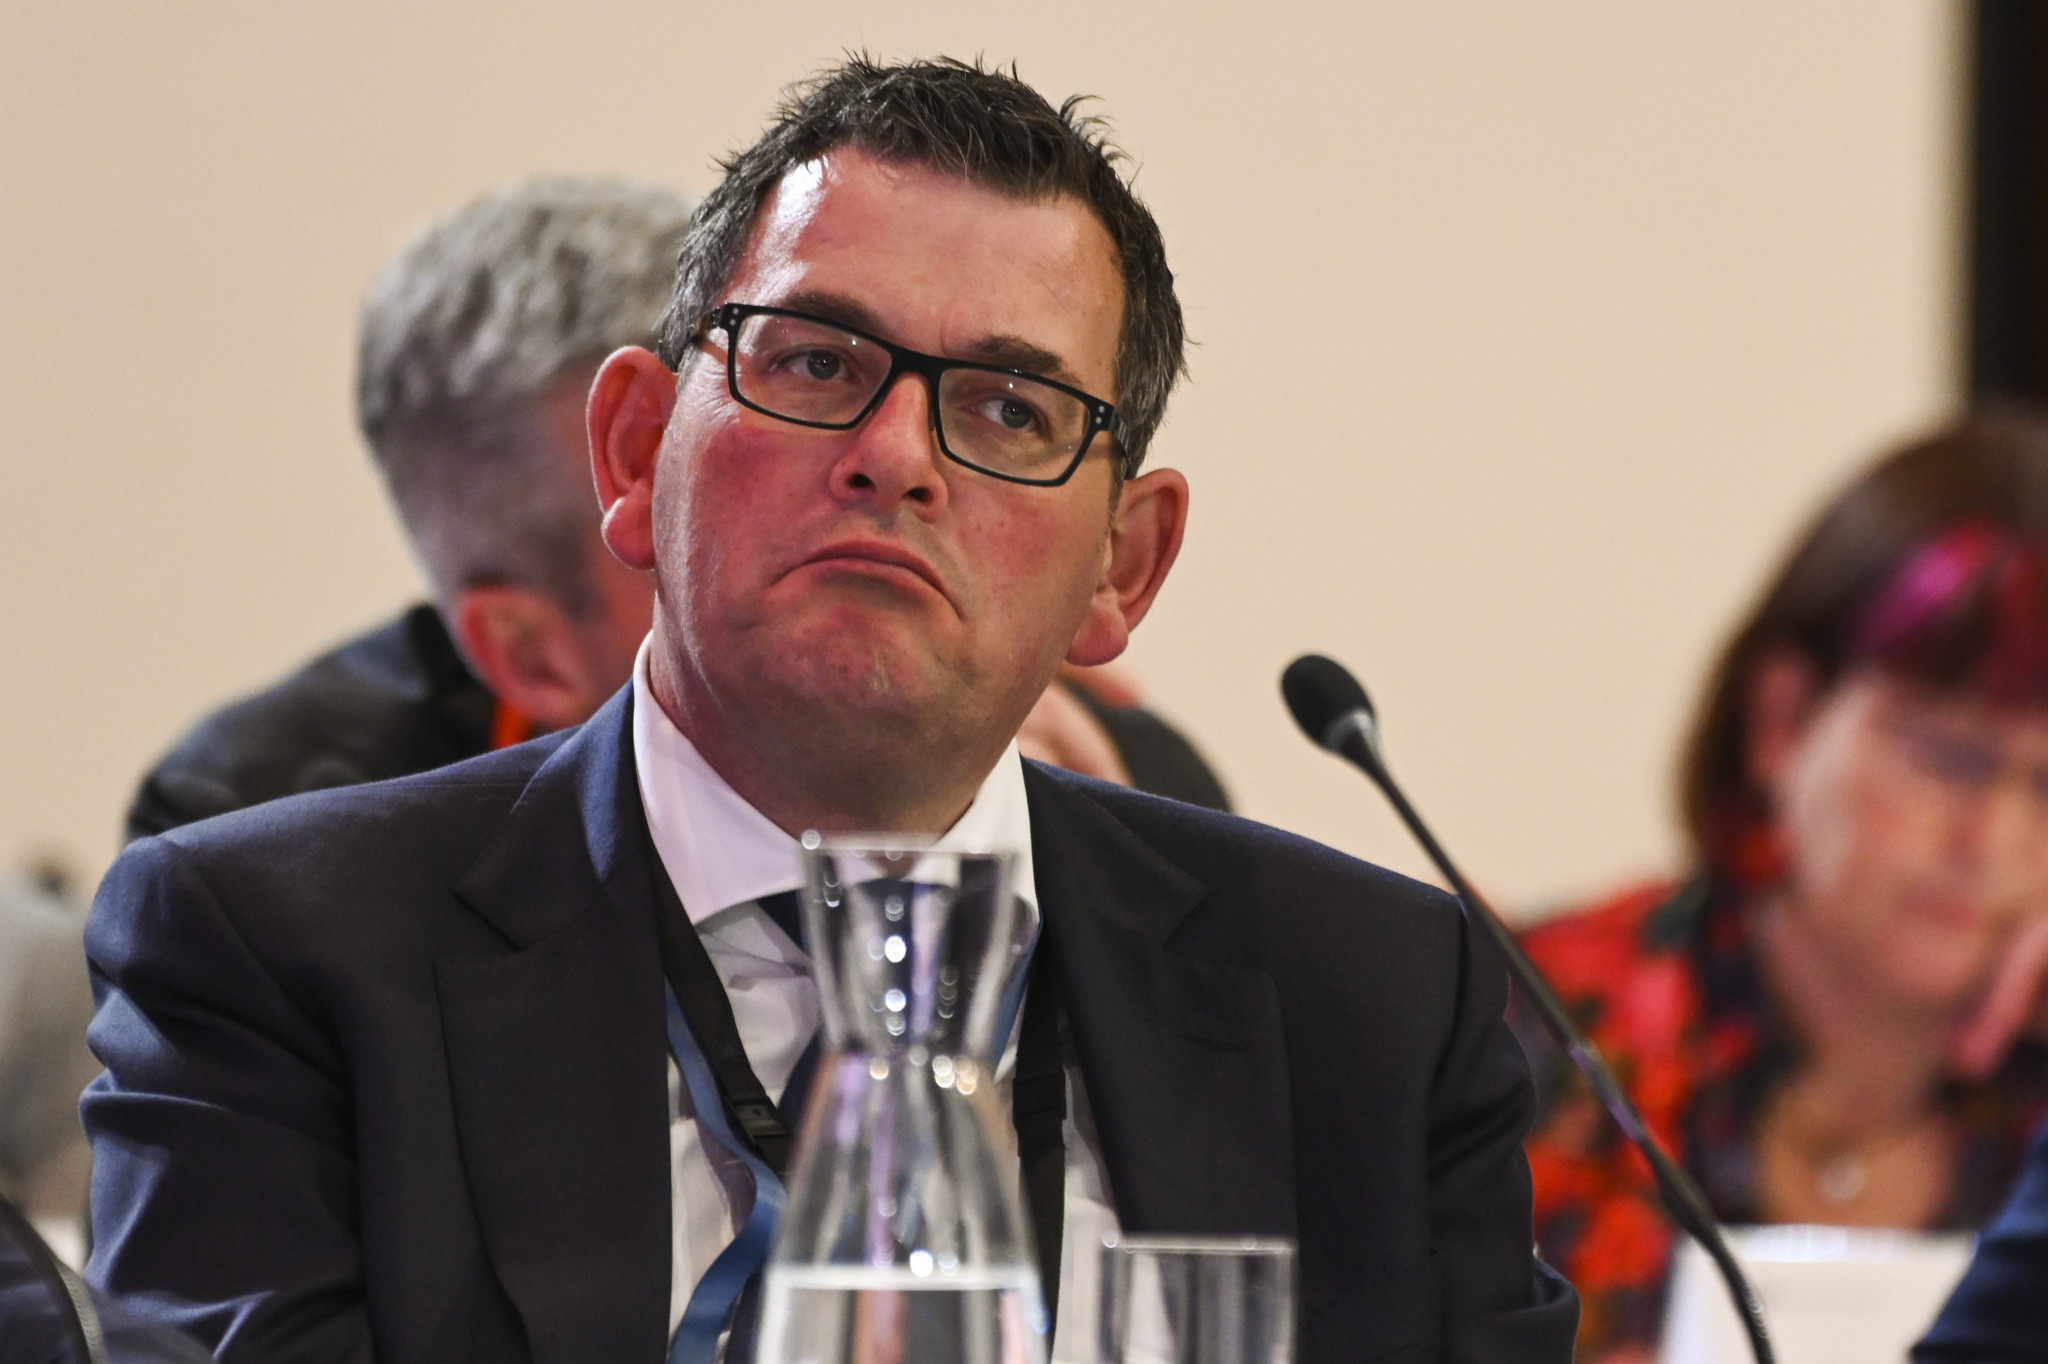 Pressure is growing on Victoria Premier Daniel Andrews to reveal the state's housing plan for the 2026 Commonwealth Games with calls for new homes in Ballarat ©Getty Images